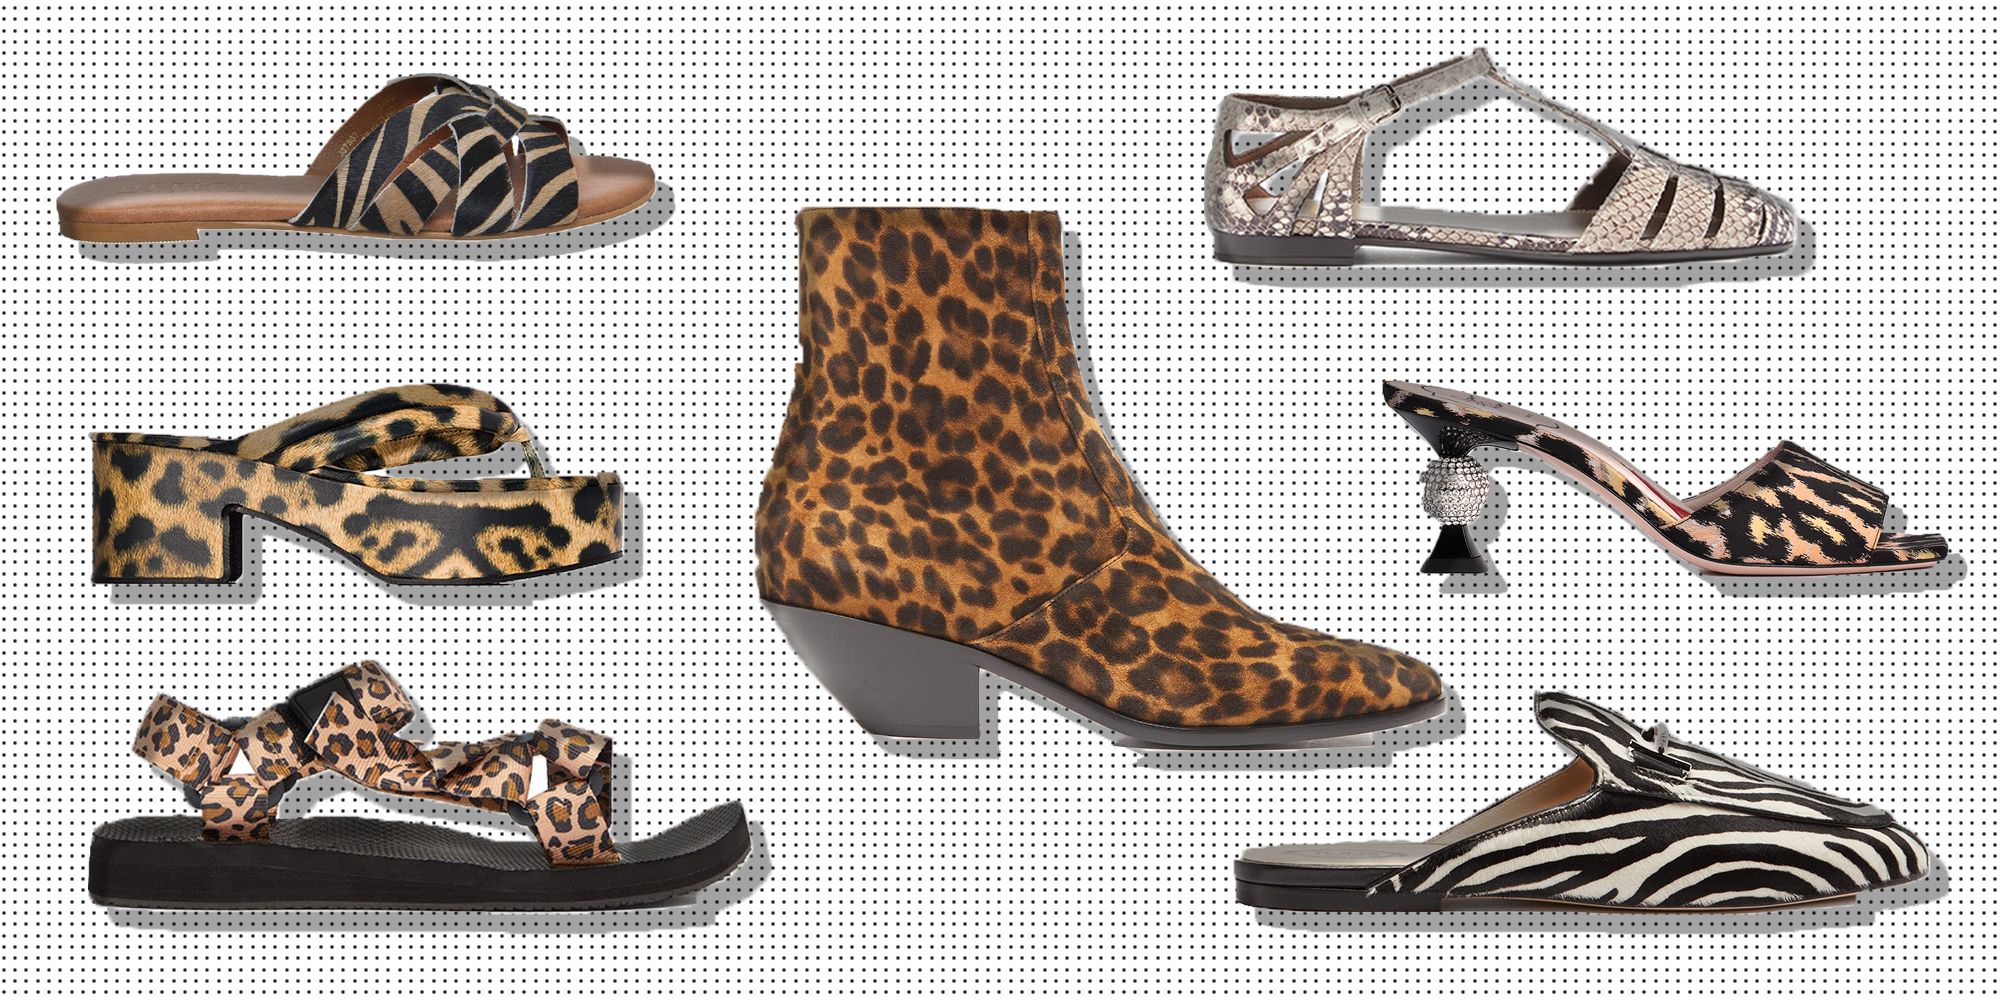 The Best Animal and Leopard Print Shoes 